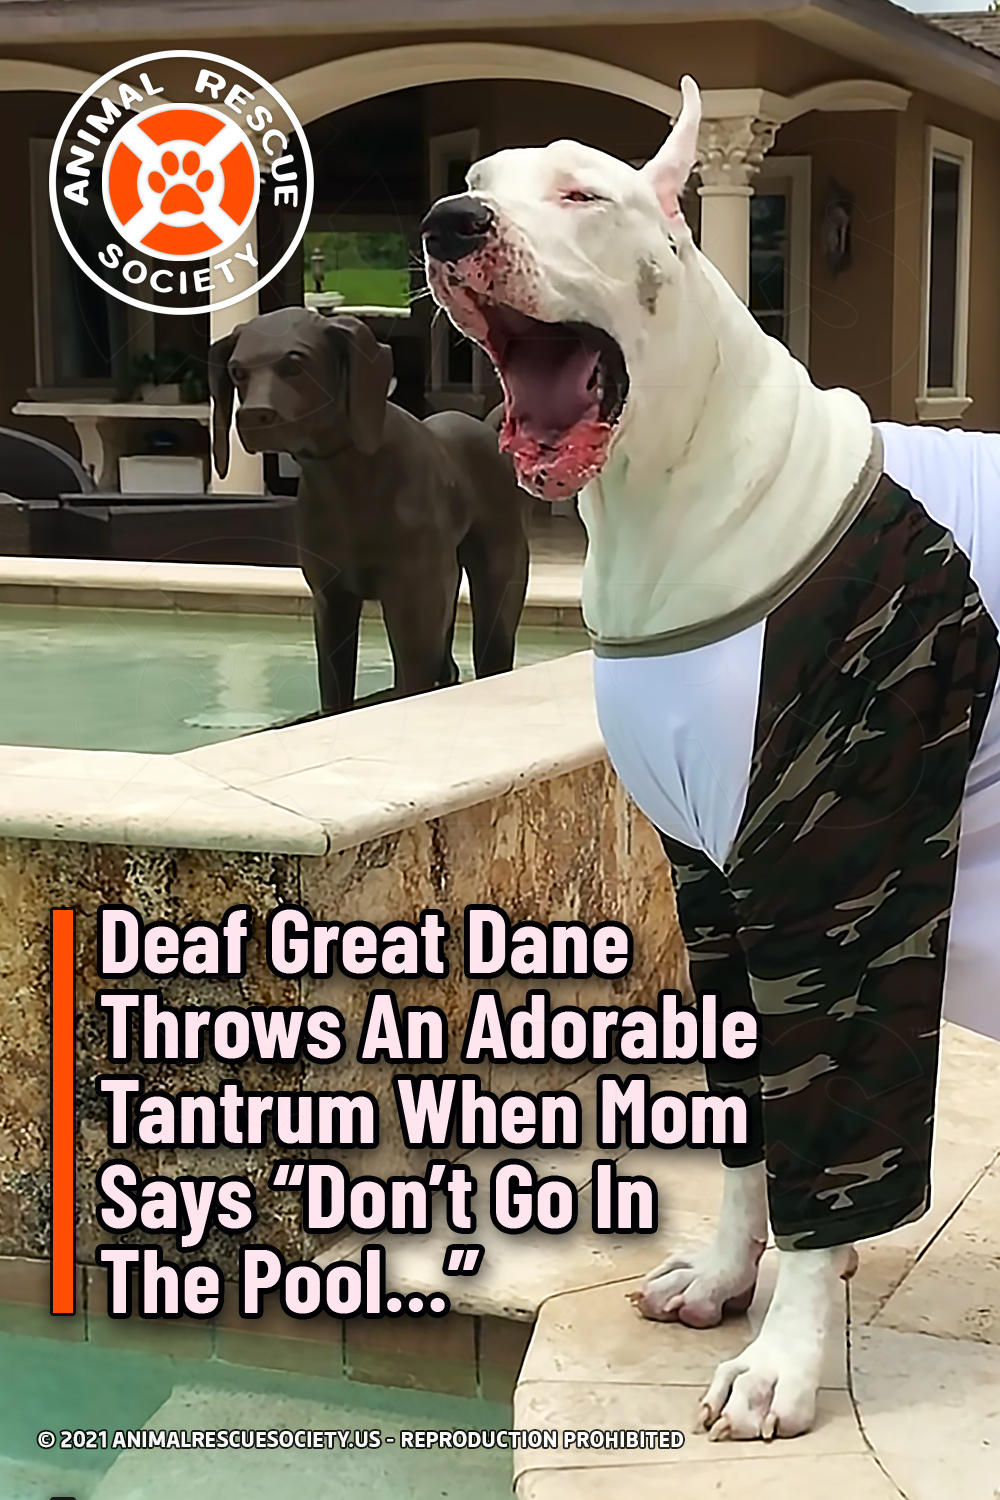 Deaf Great Dane Throws An Adorable Tantrum When Mom Says “Don’t Go In The Pool…”